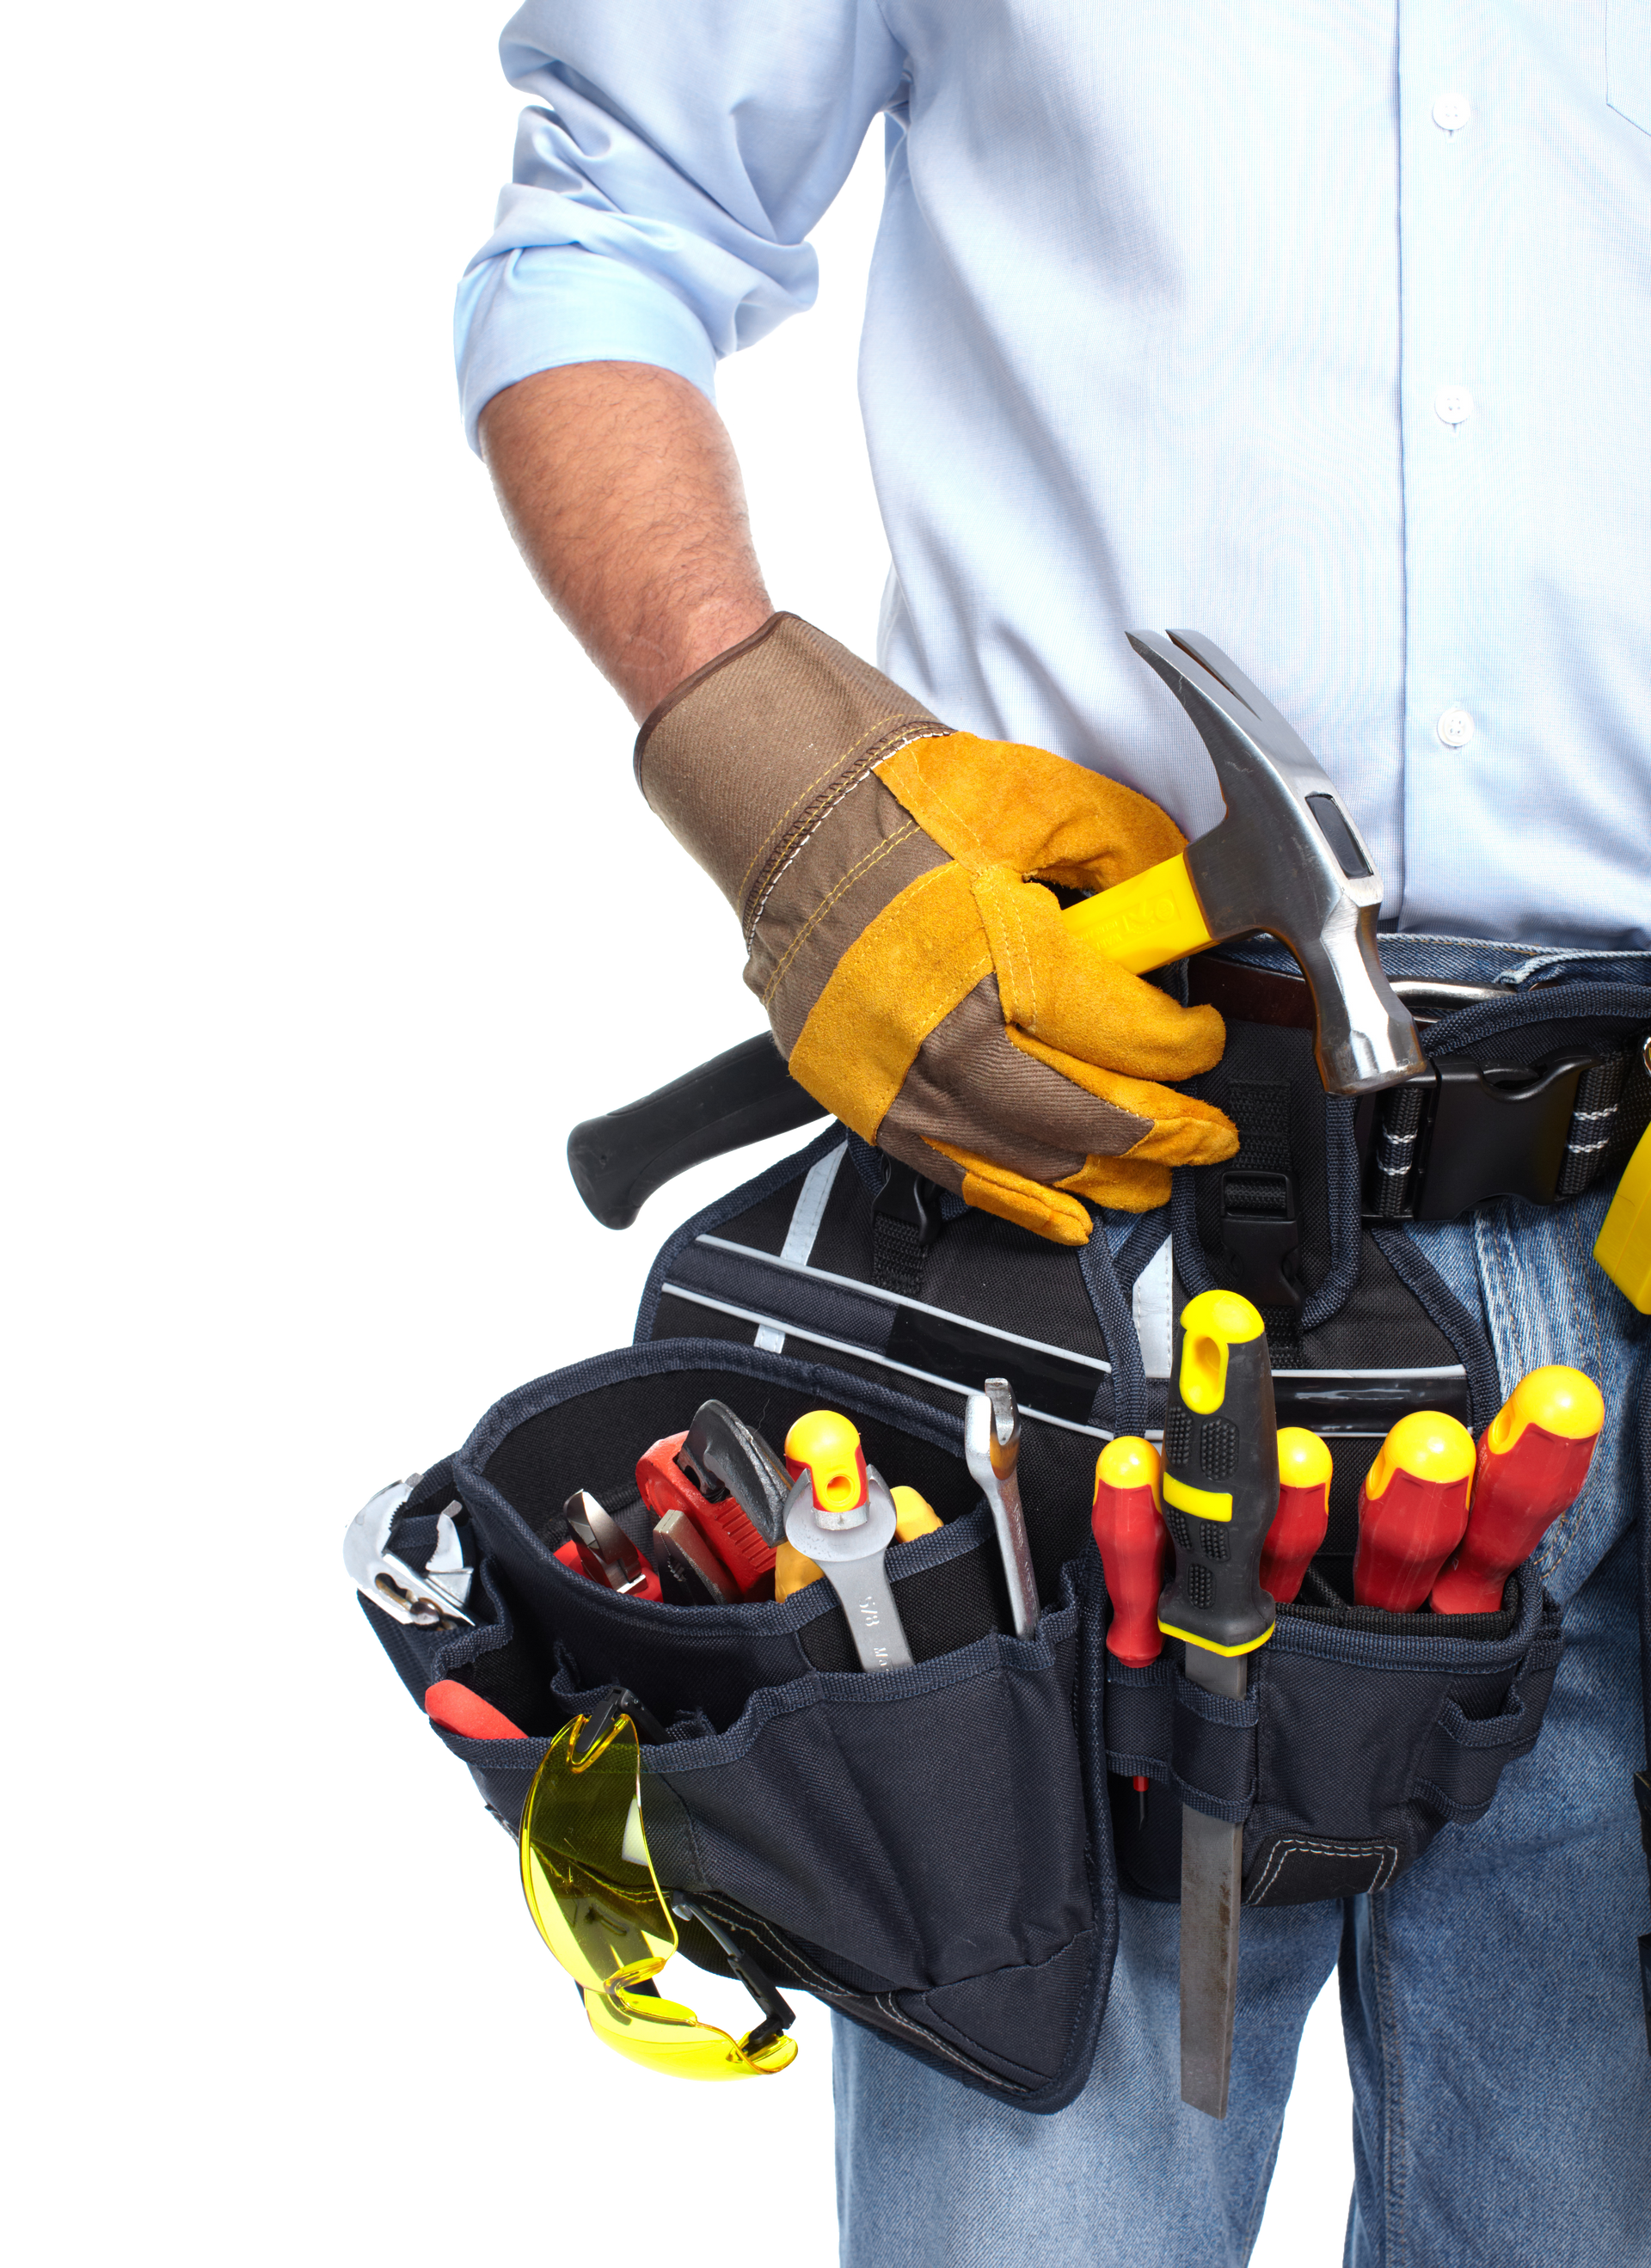 A man wearing gloves and a tool belt holds a hammer